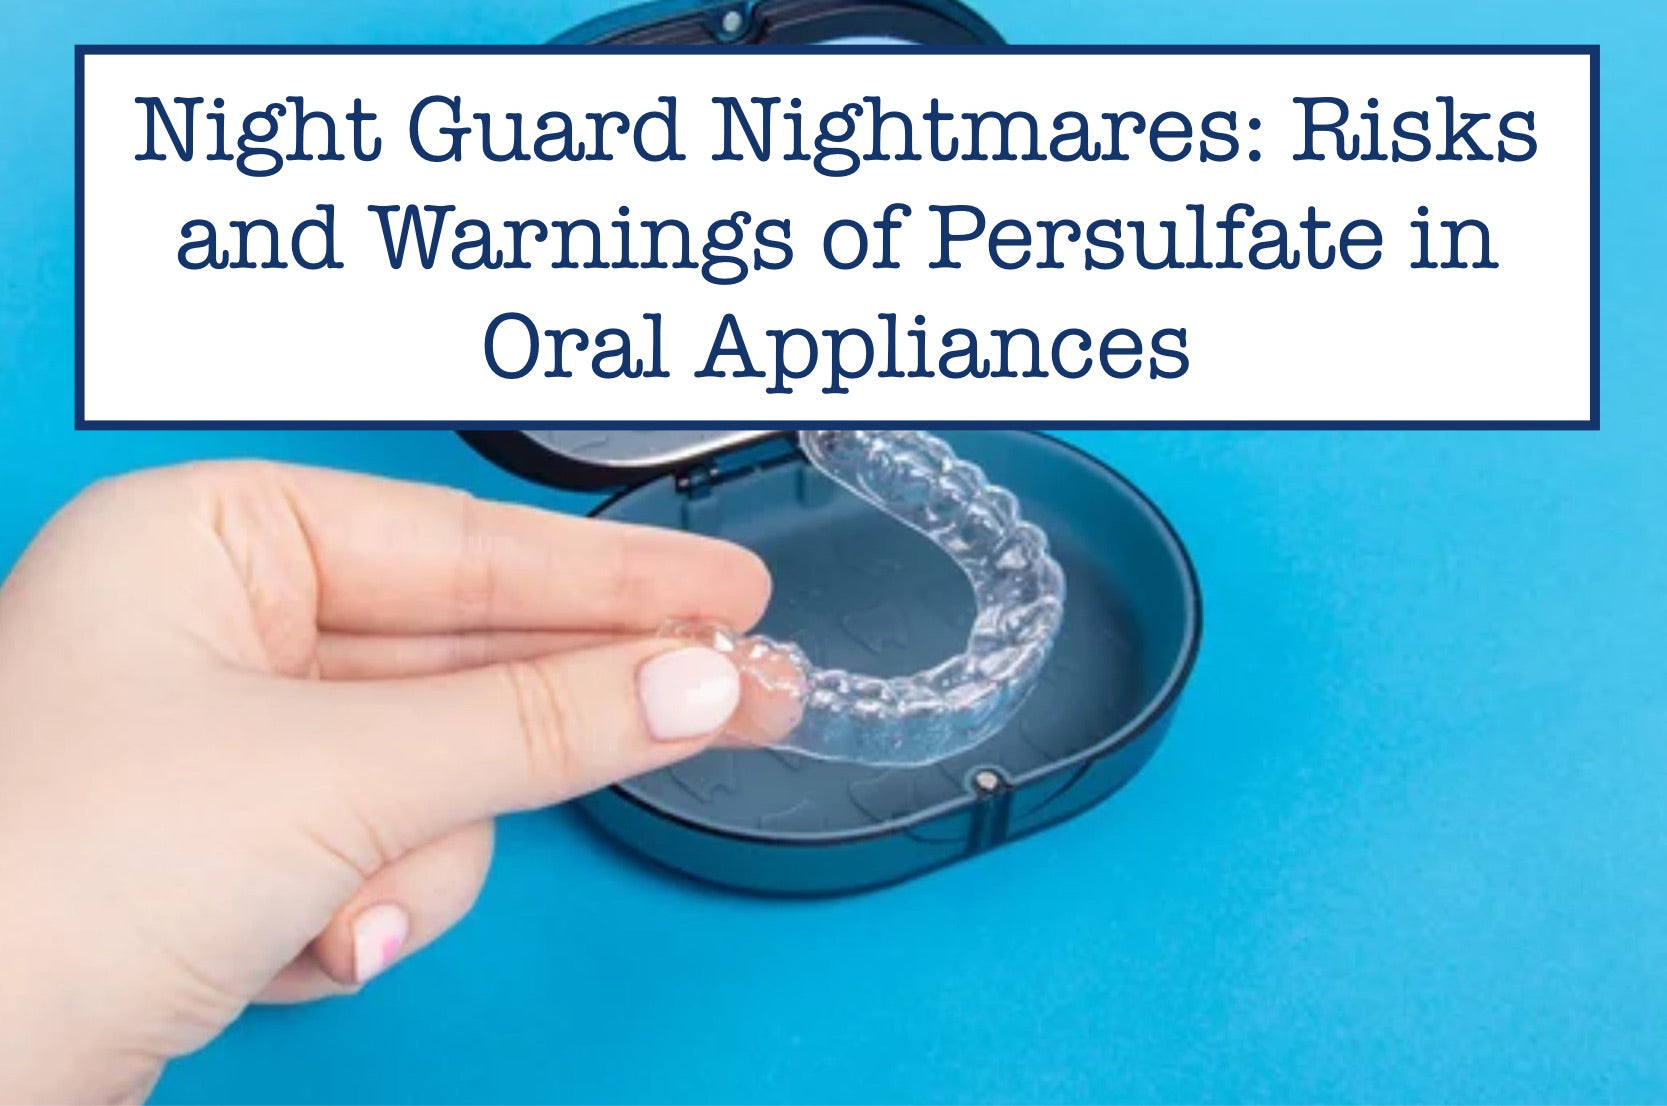 Night Guard Nightmares: Risks and Warnings of Persulfate in Oral Appliances